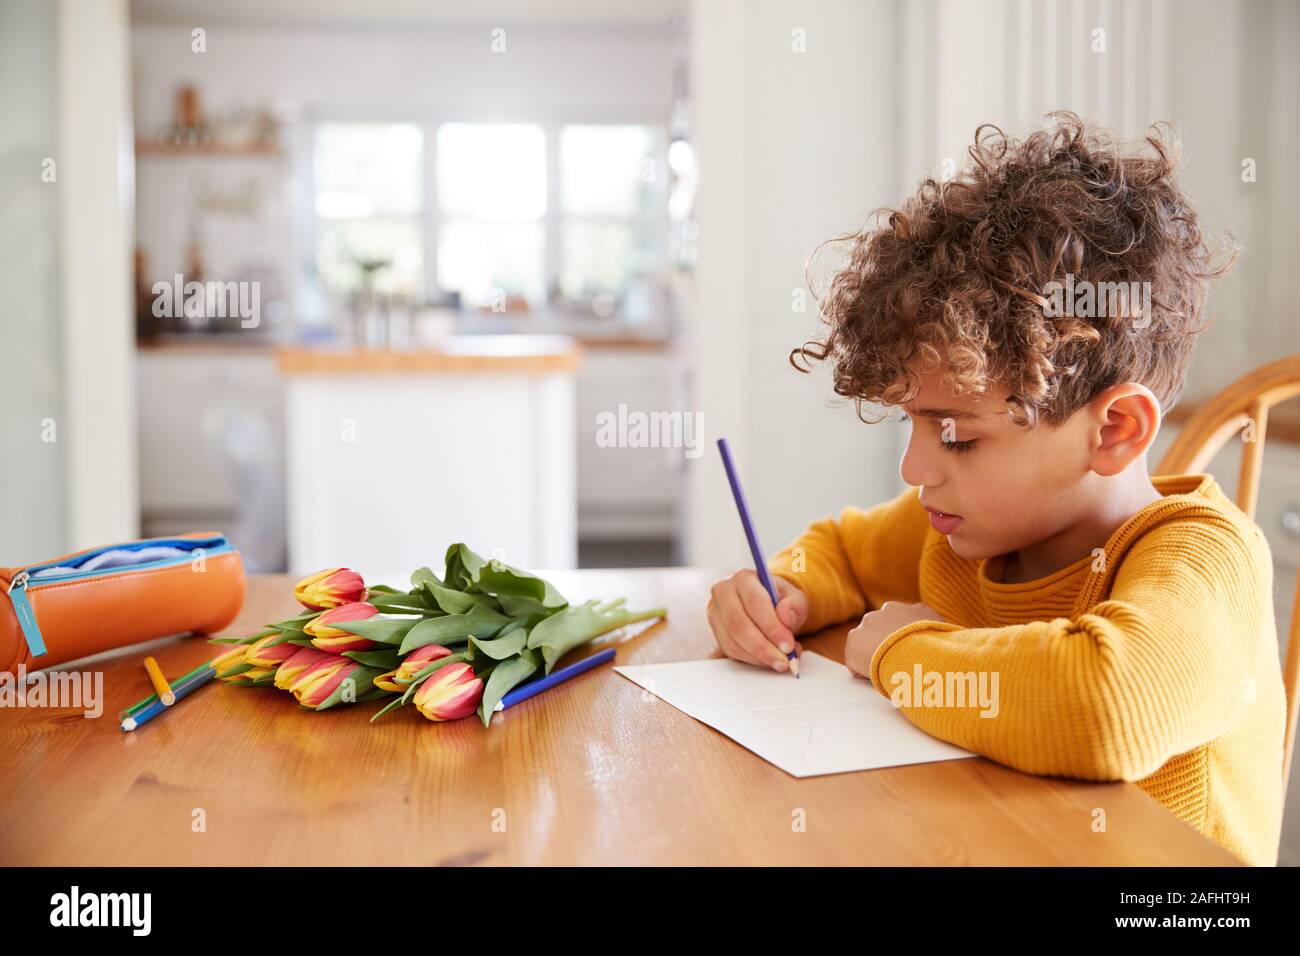 Young Boy At Home With Bunch Of Flowers Writing In Mothers Day Card Stock Photo